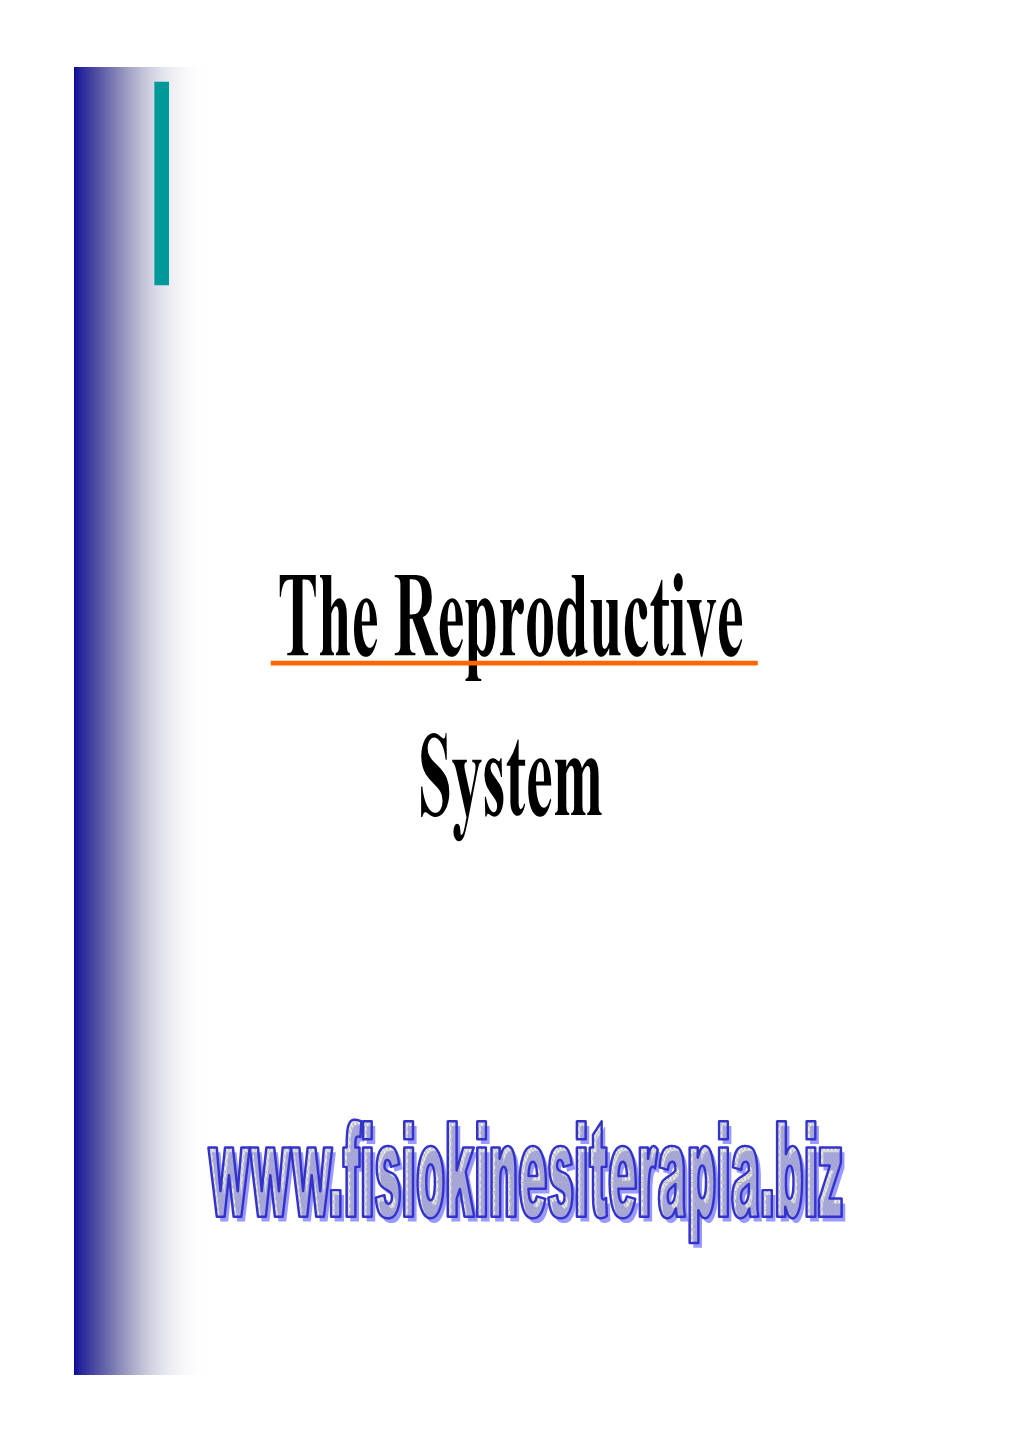 The Reproductive System Thethe Reproductivereproductive Systemsystem